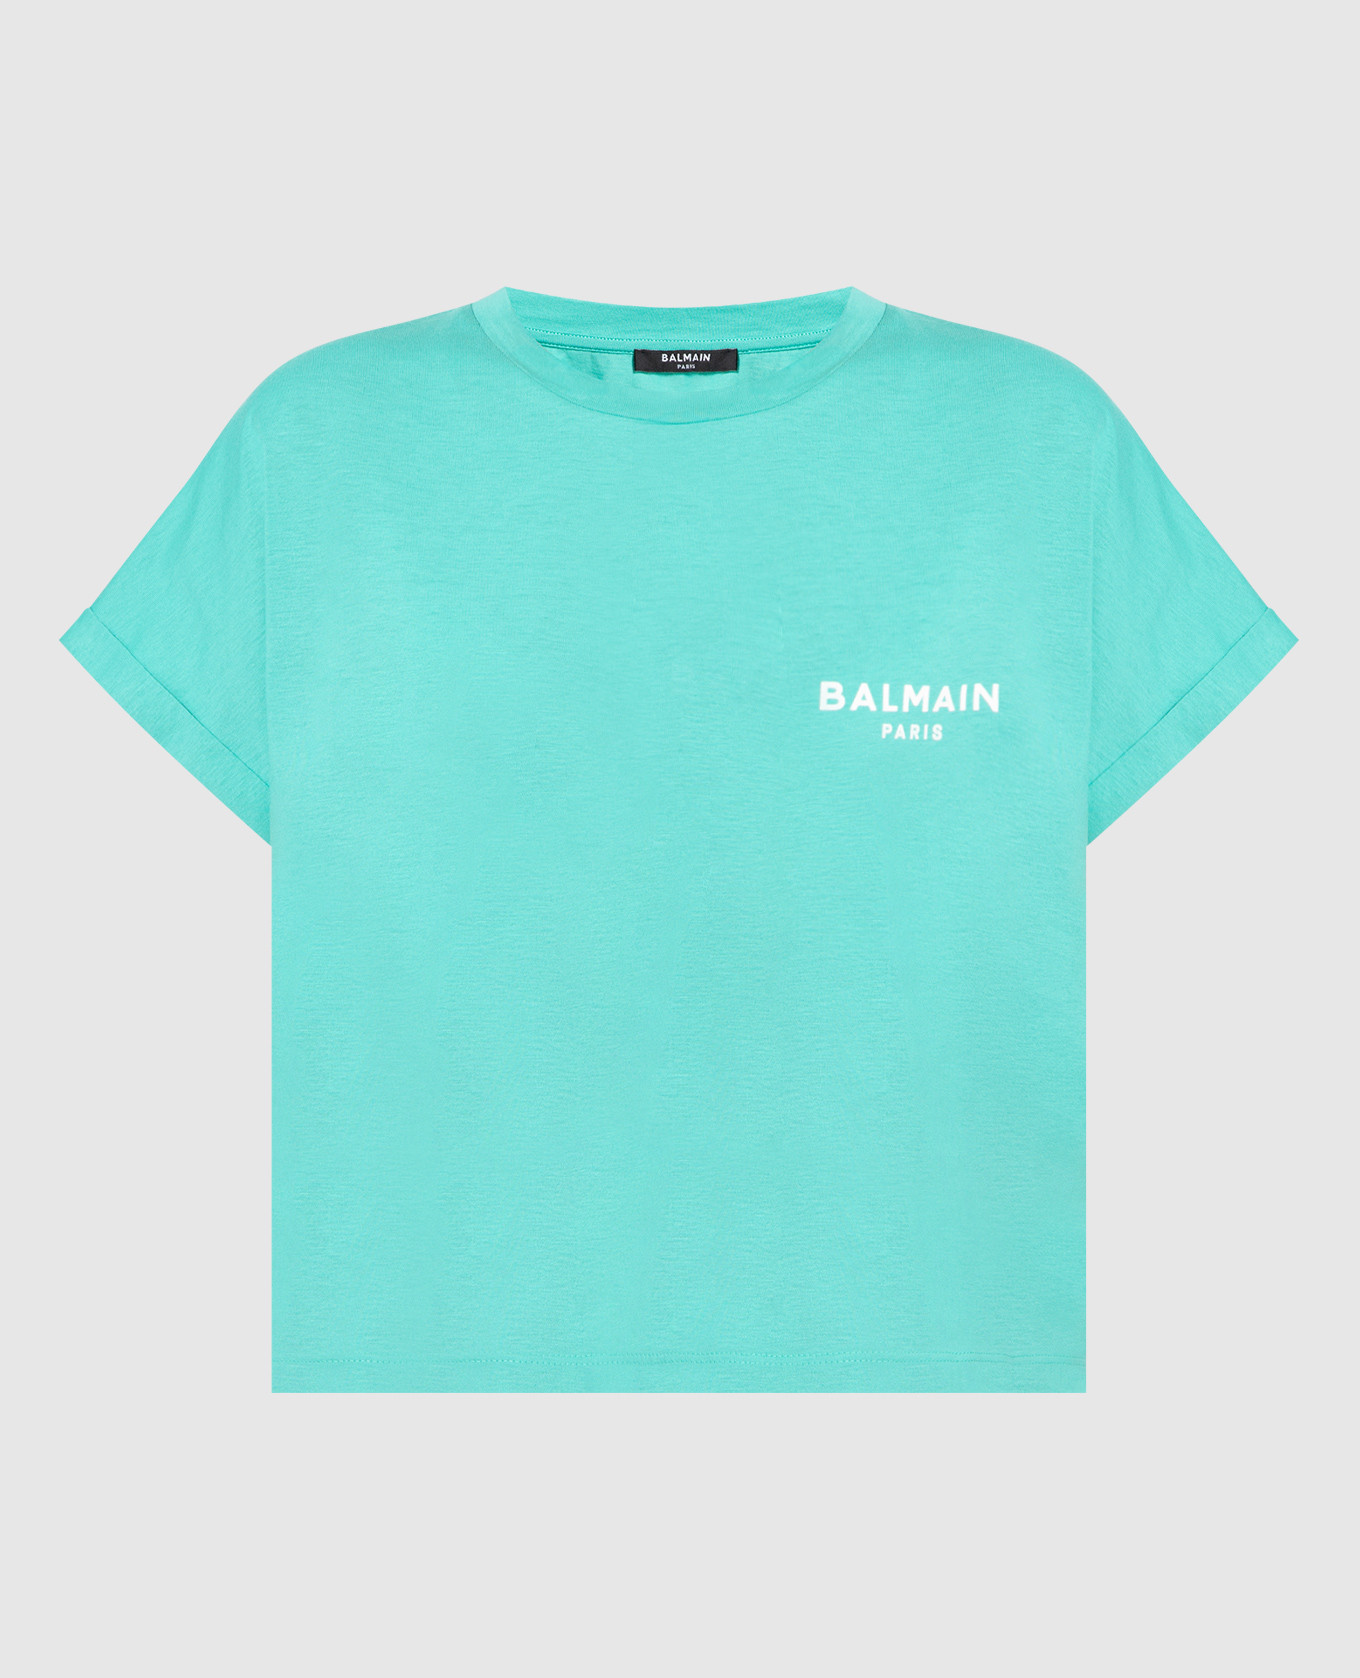 Green t-shirt with textured logo